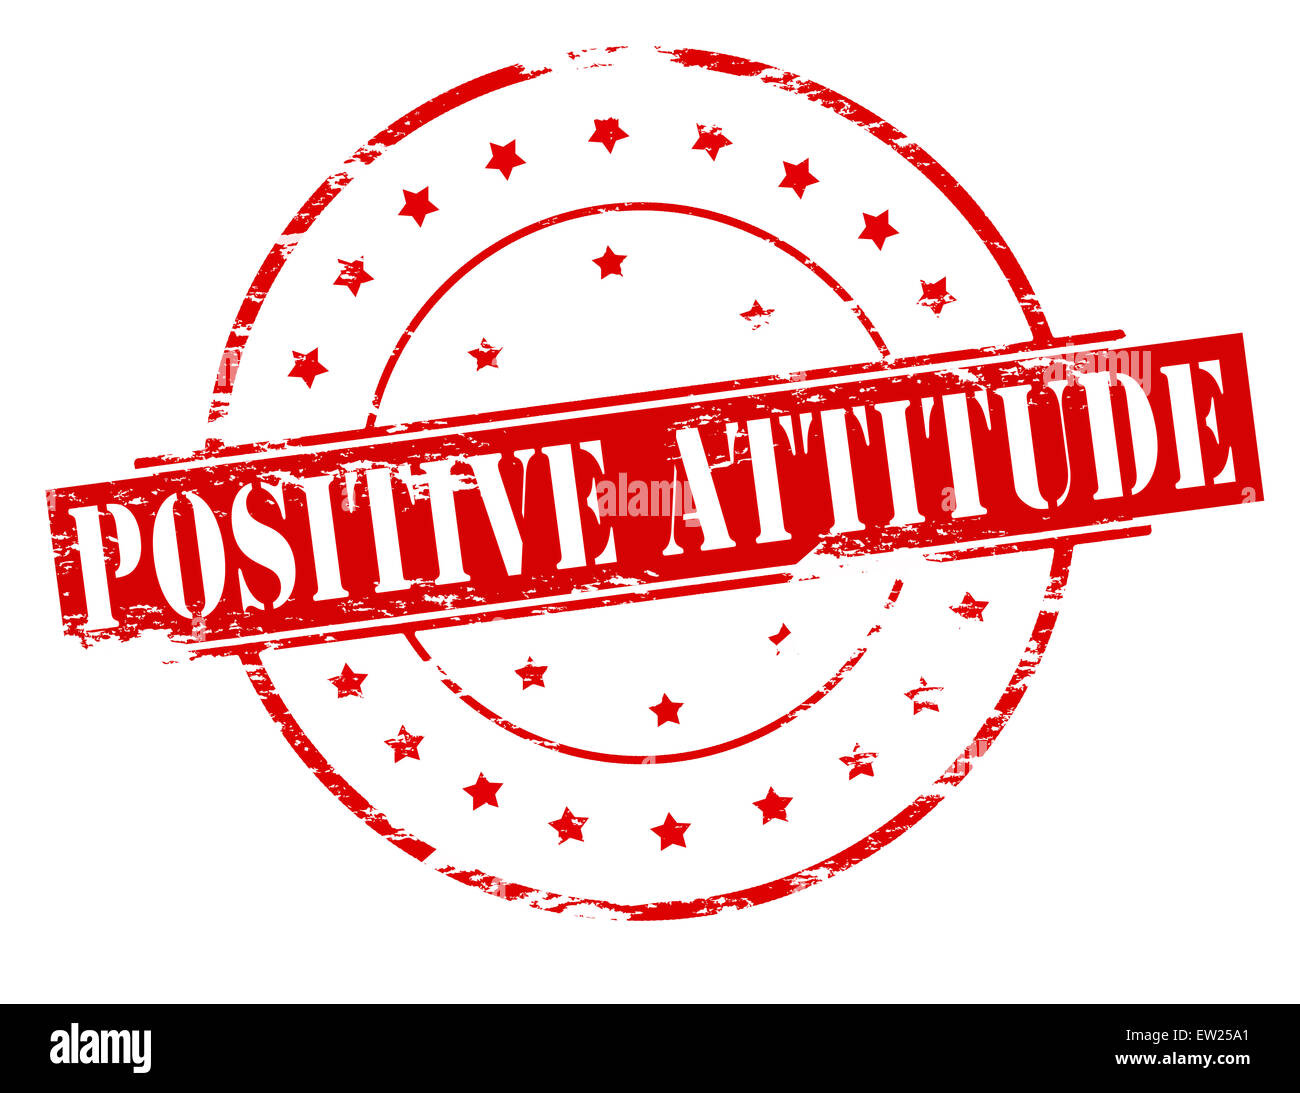 Positive attitude Cut Out Stock Images & Pictures - Alamy